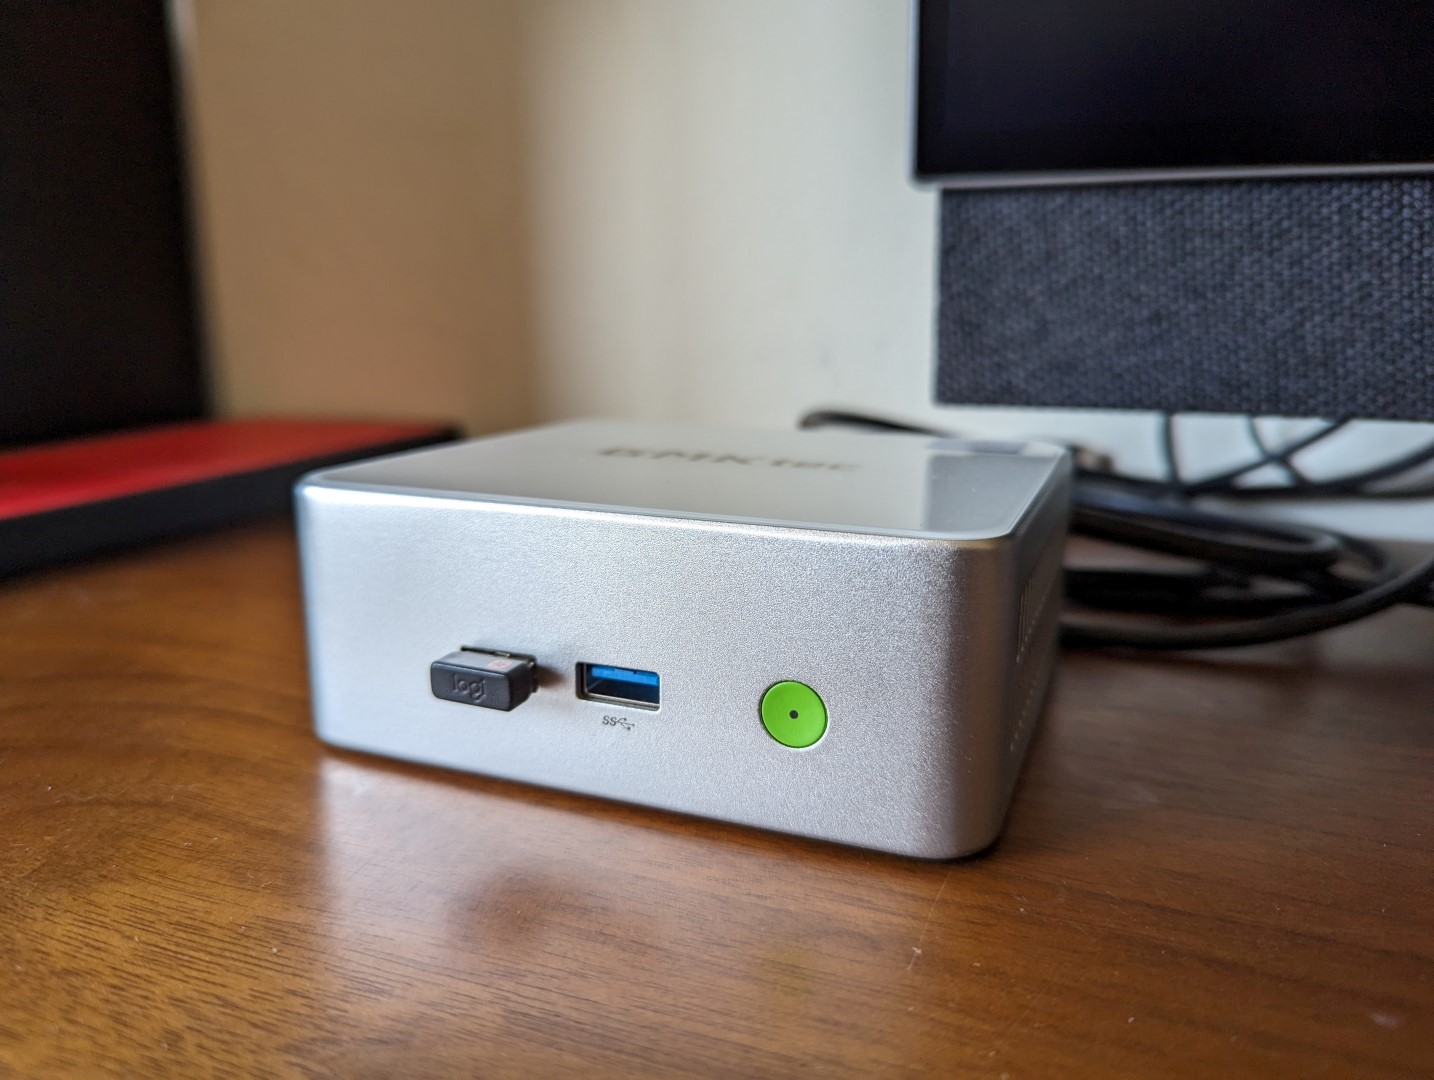 GMKtec NucBox M3 mini PC review: Core i5-12450H is just too power-hungry -   Reviews